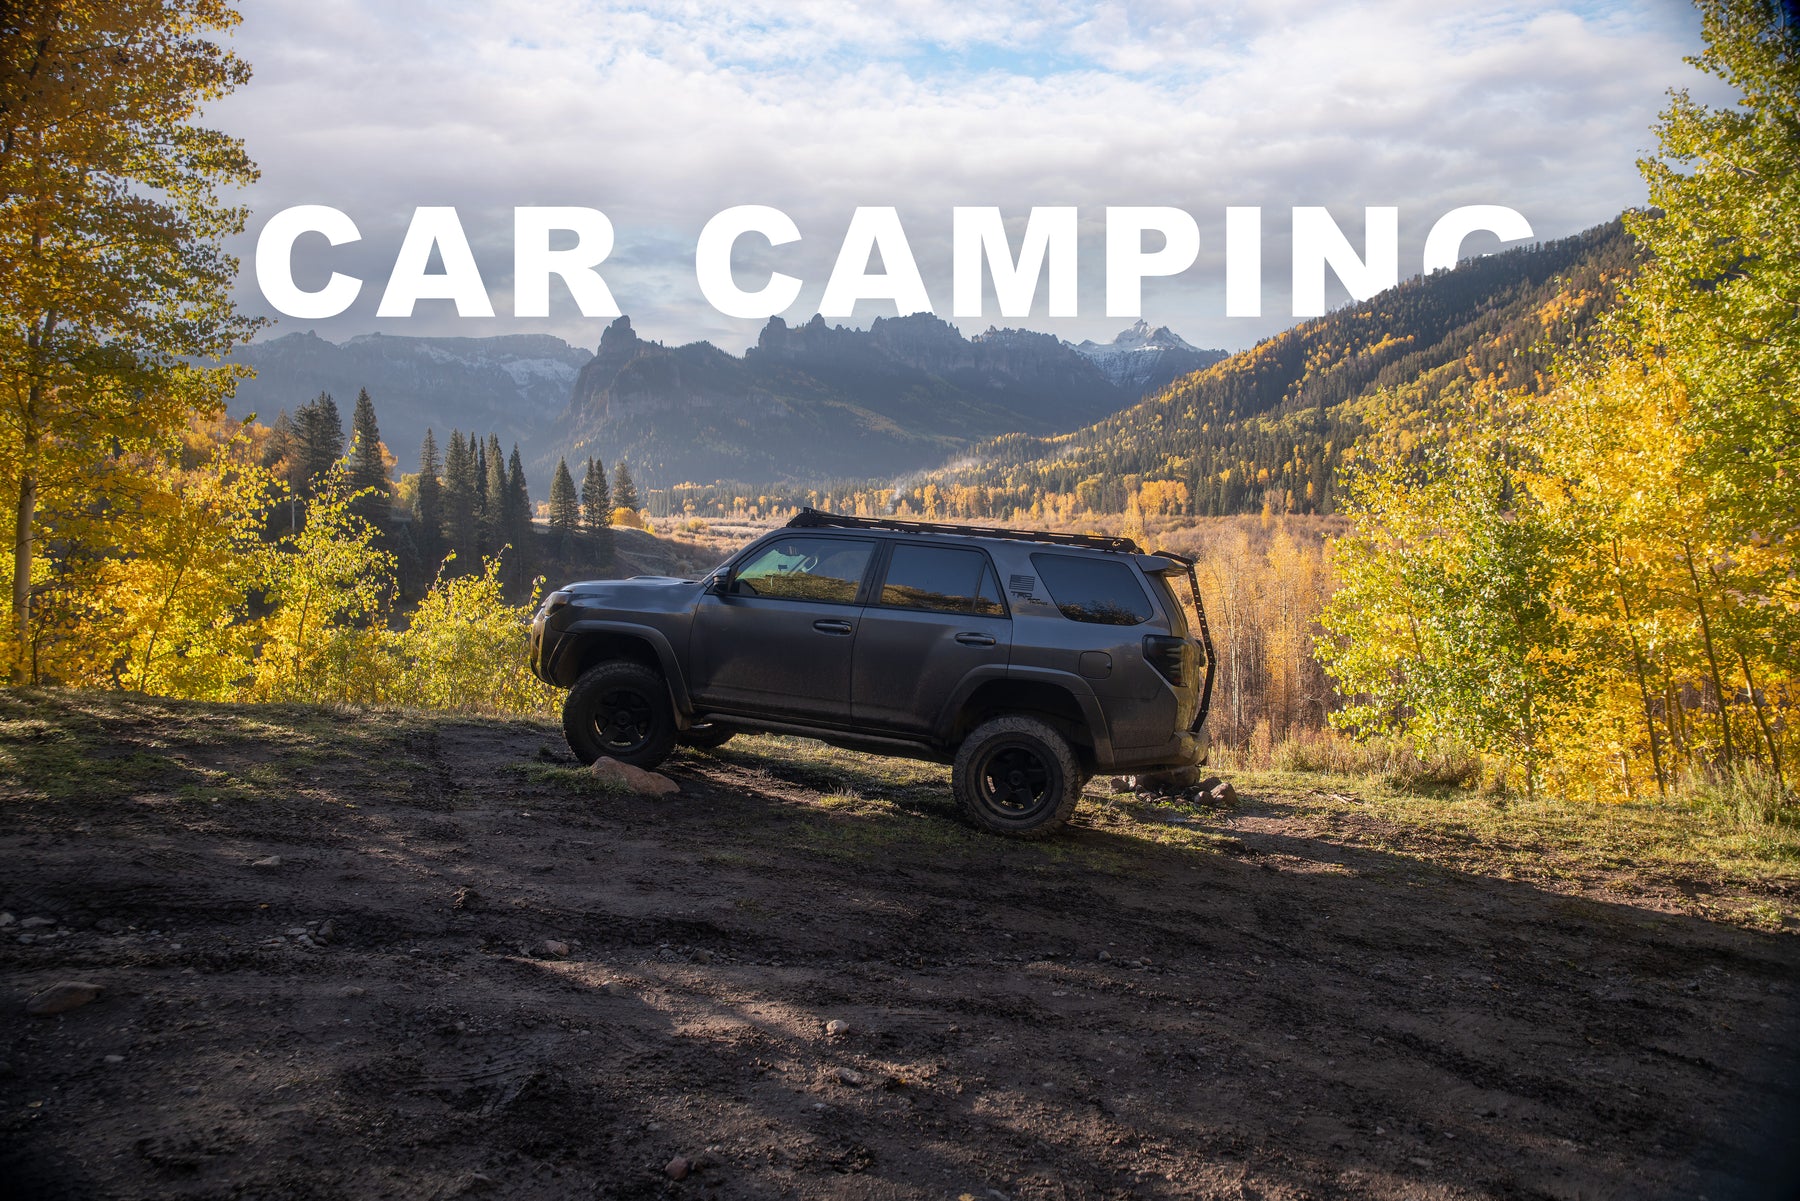 Car Camping in a Toyota 4Runner